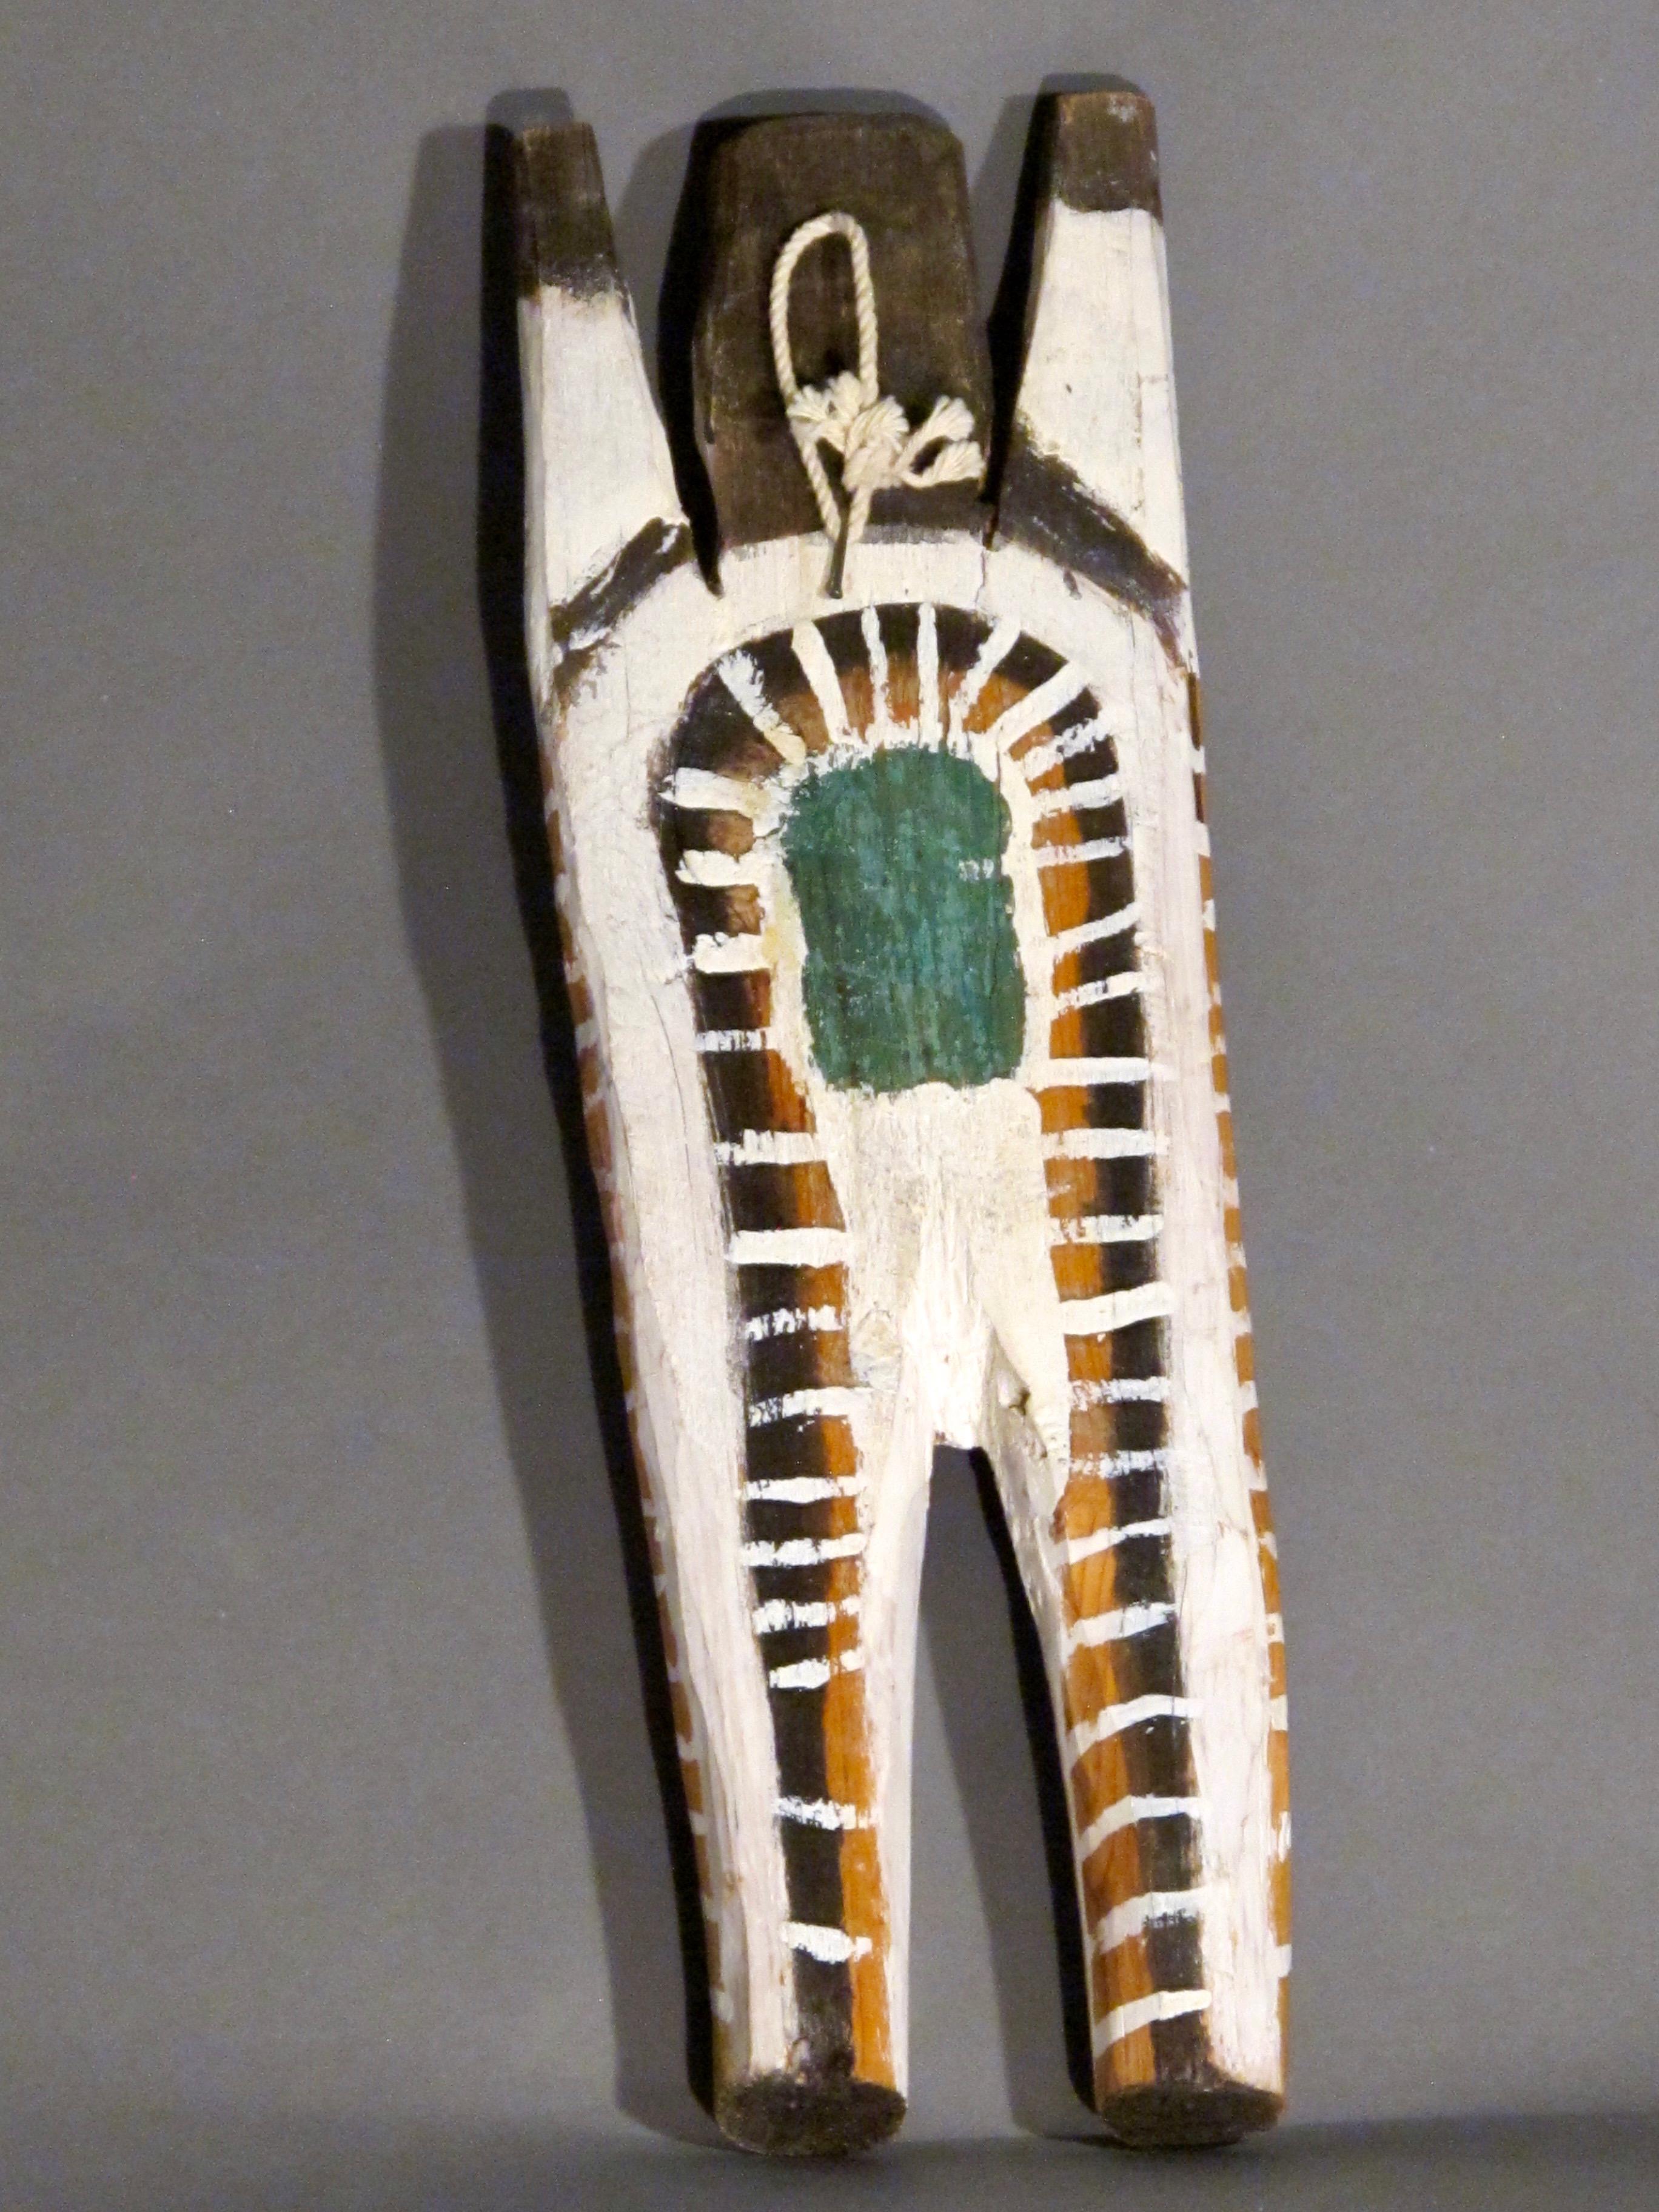 Untitled Figure with X on Chest by Charlie Willeto, Navajo Folk Art, wood, paint
Vintage